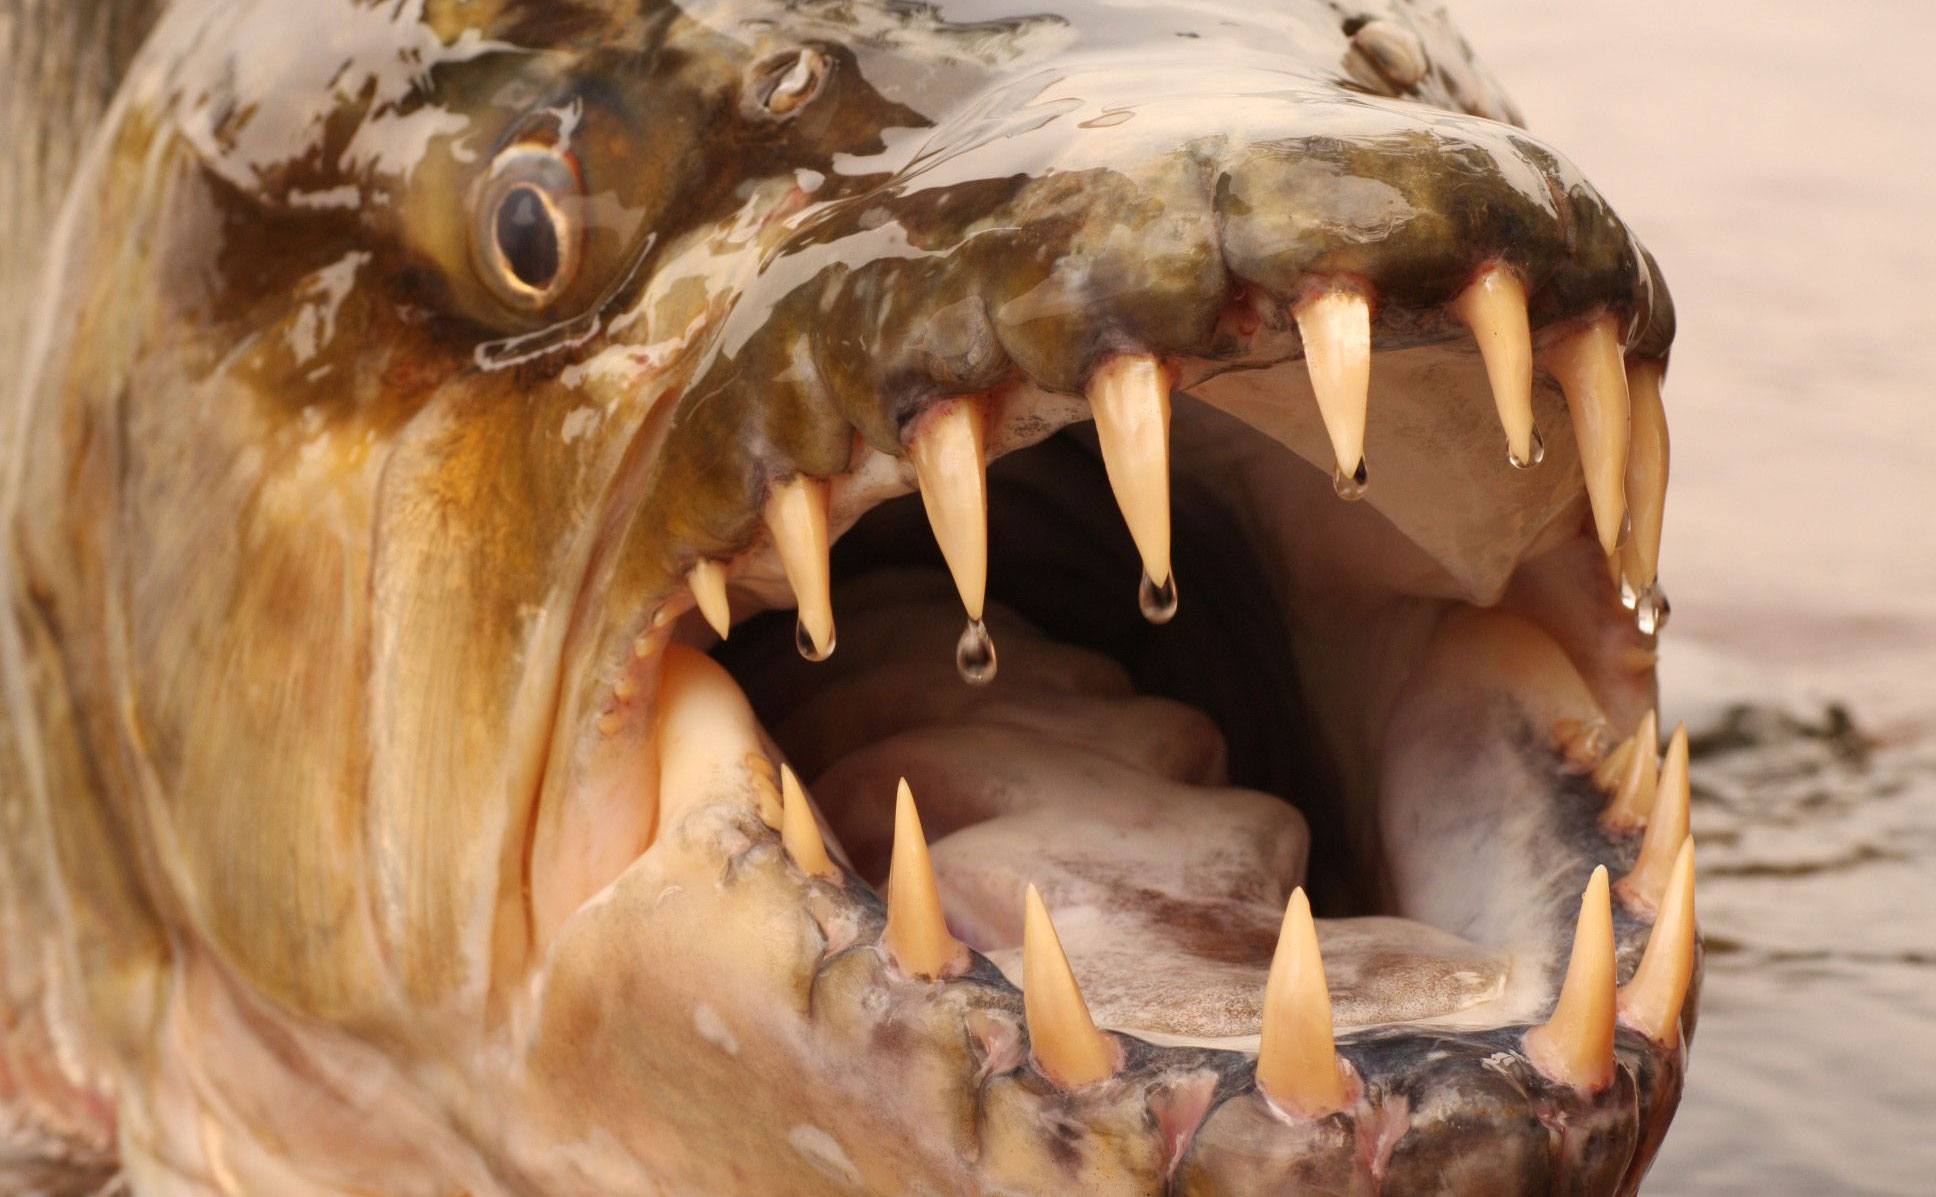 An image of a fish’s teeth in a still from the show.